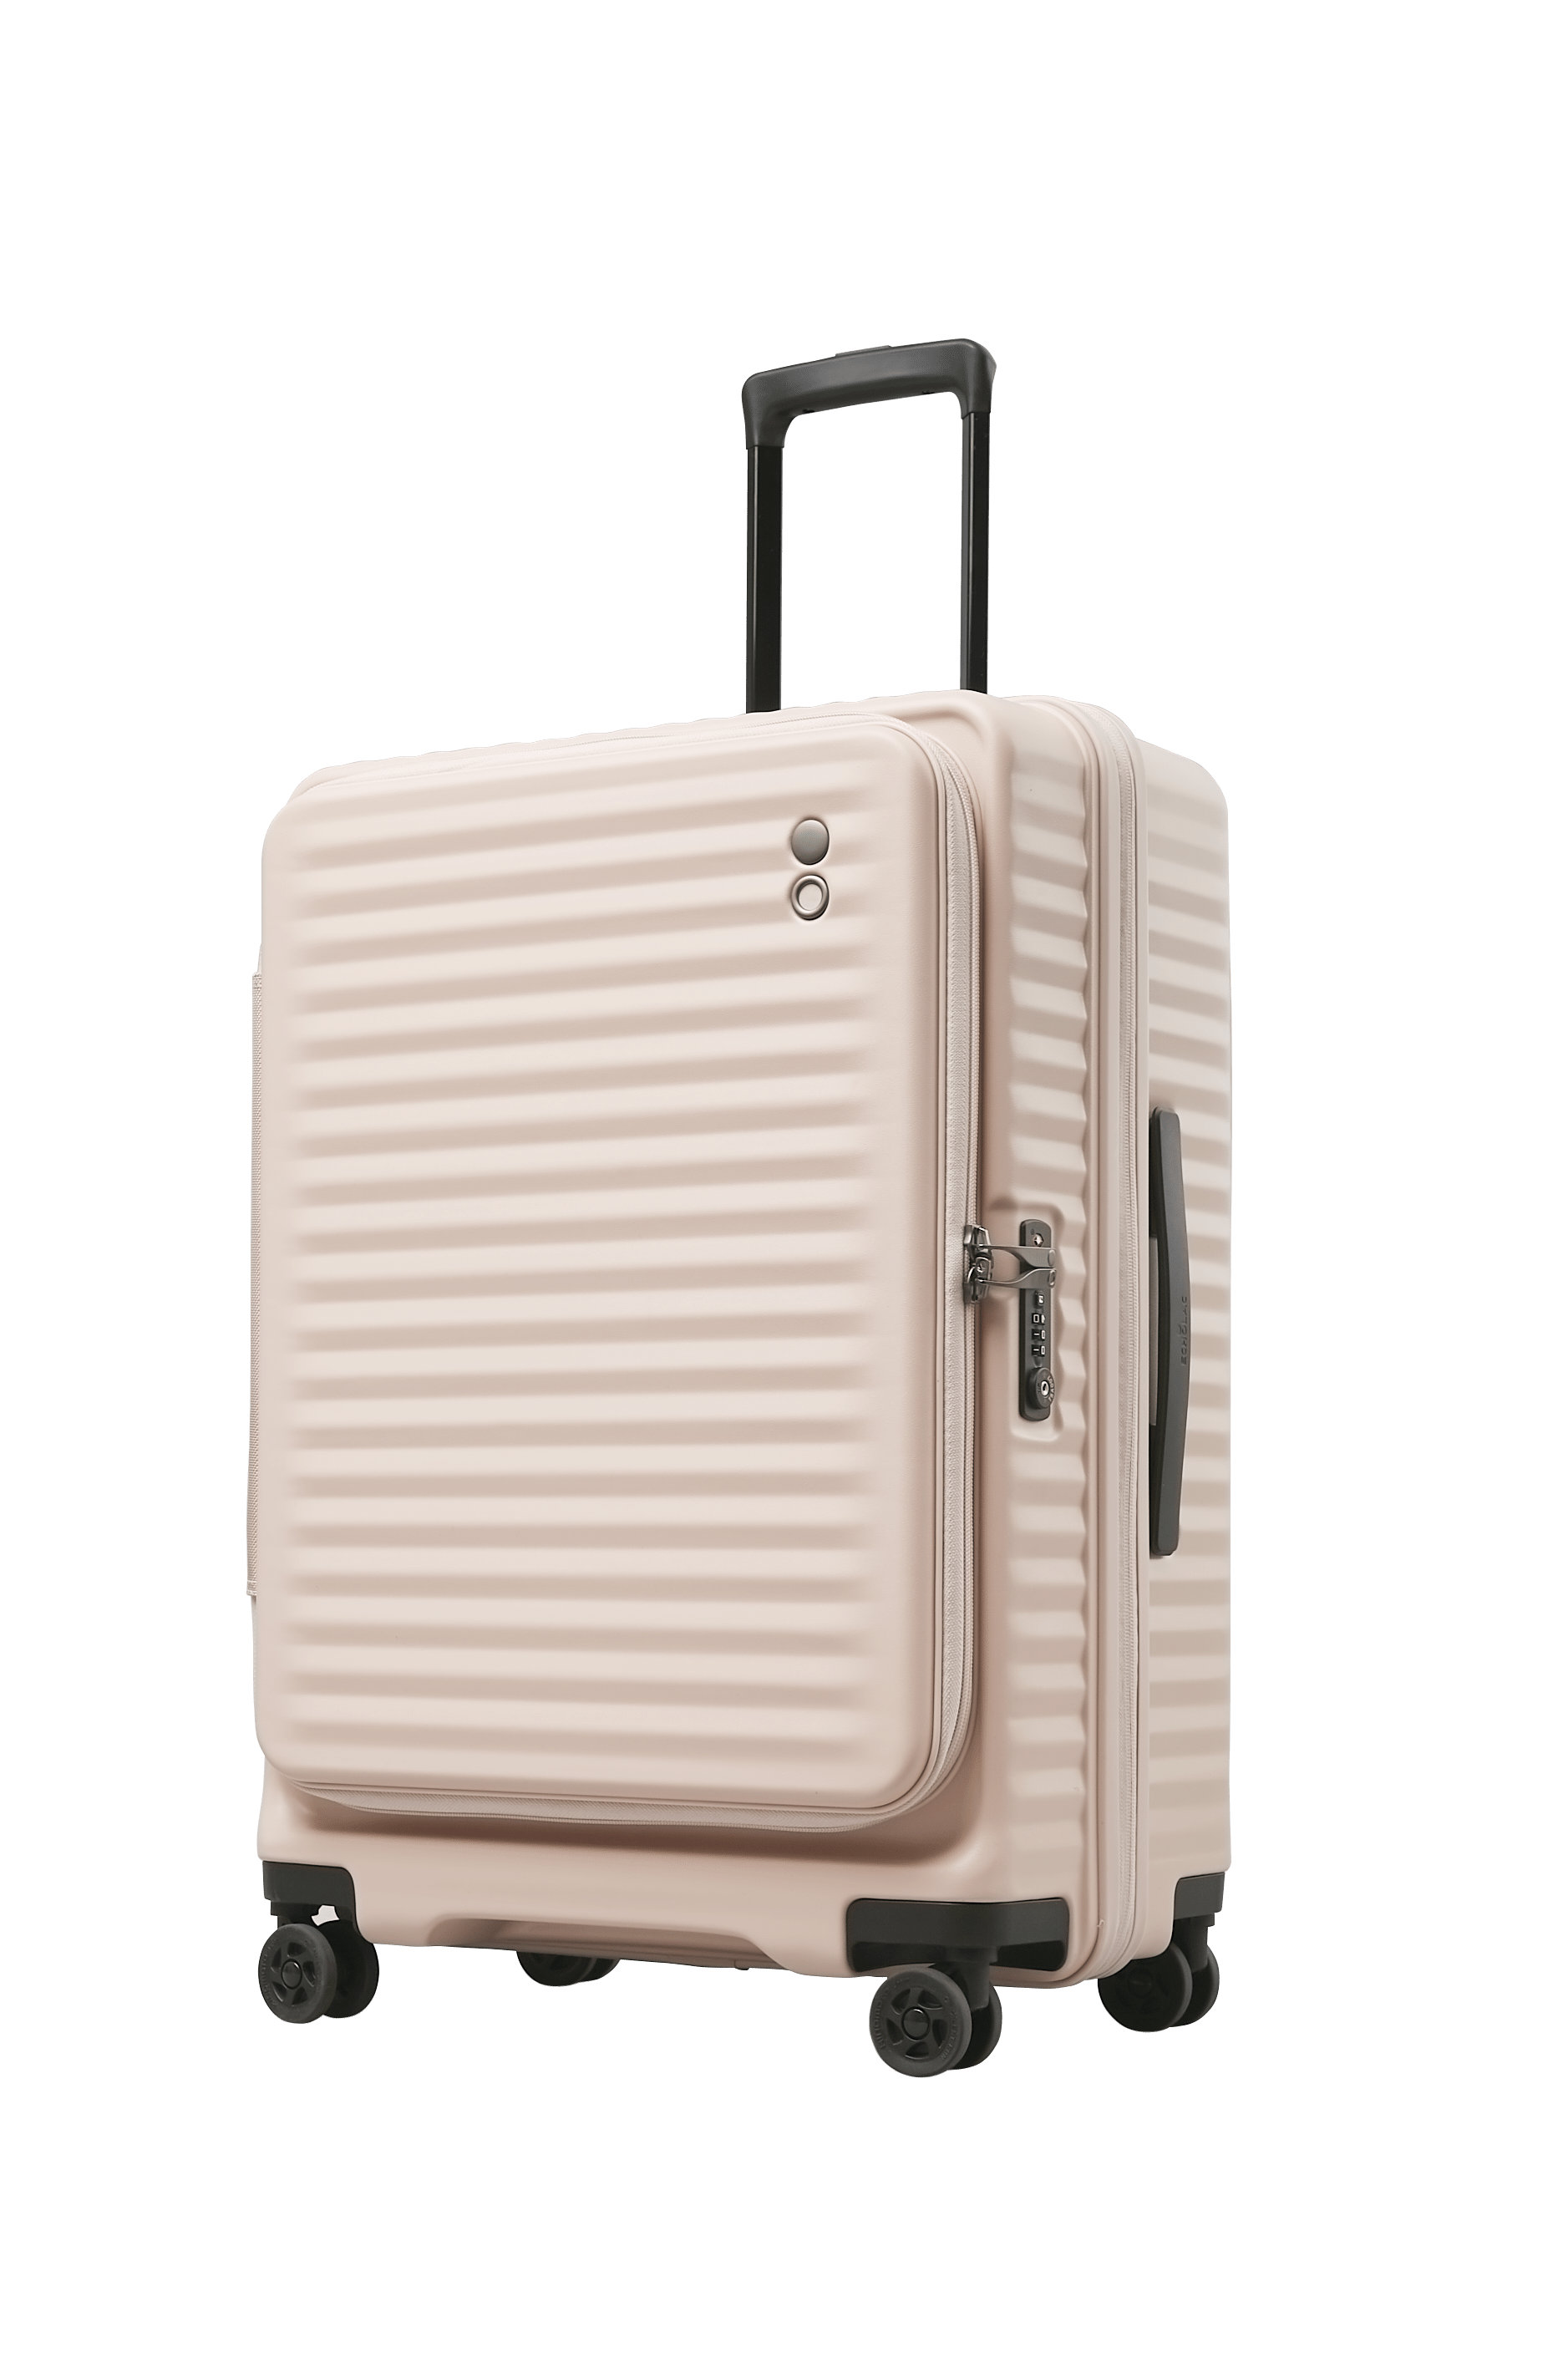 Echolac Celestra 20" 4 Double Wheel Cabin Luggage Trolley Pink - PC183 Pink 20